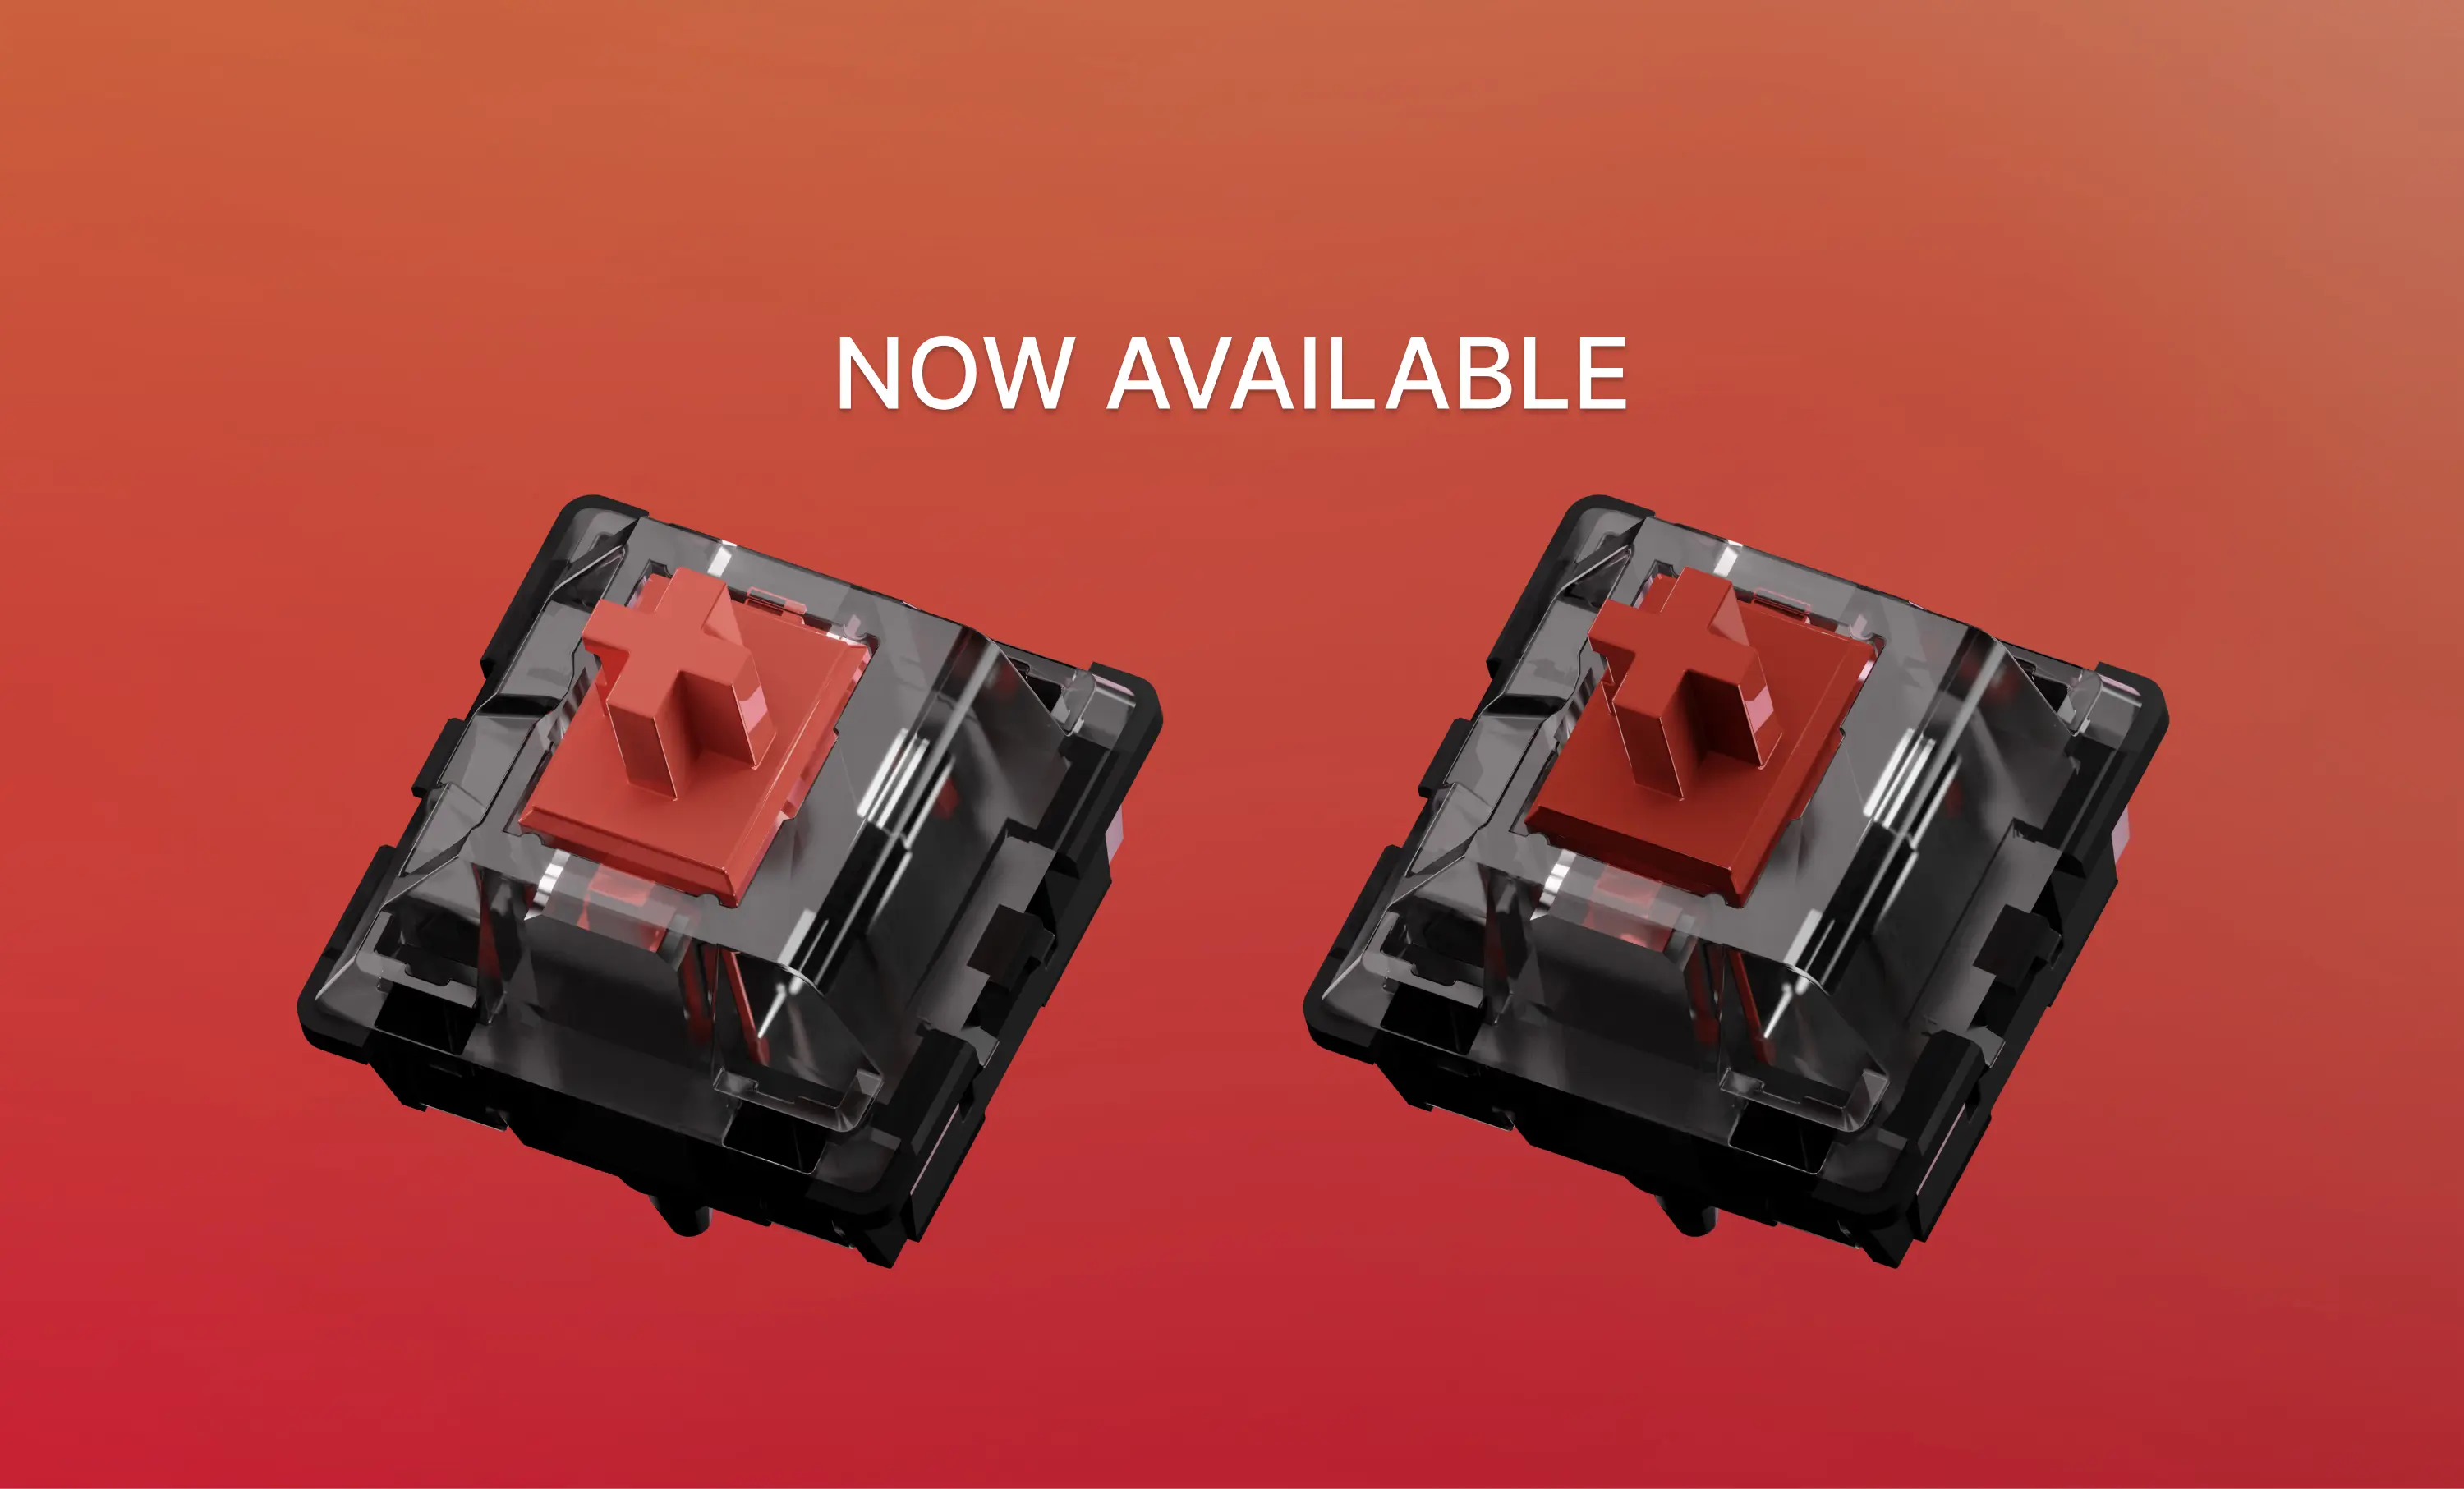 Introducing MX Red and MX Silent Red